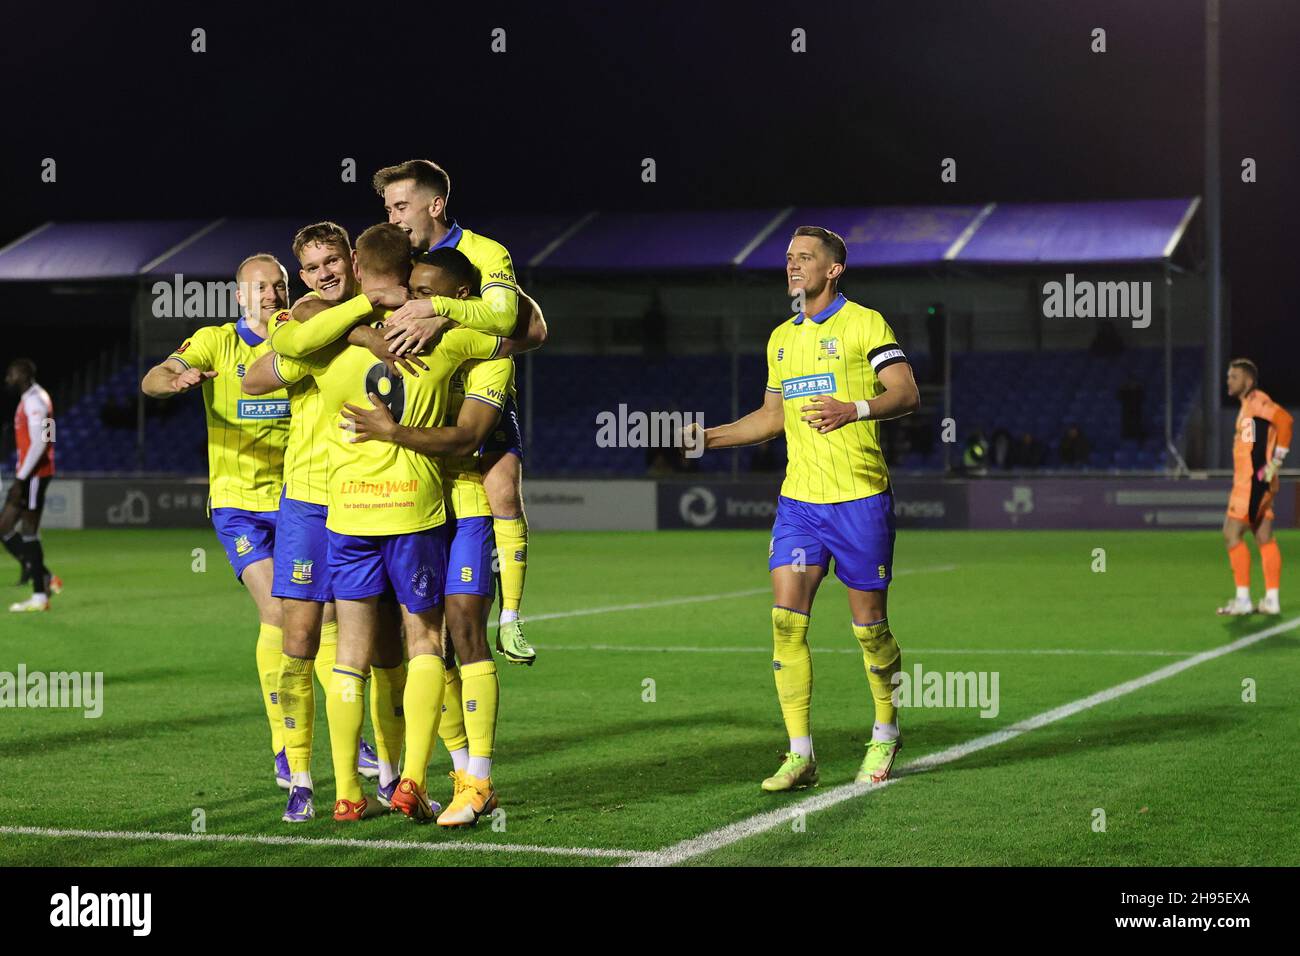 SOLIHULL, ENGLAND. DECEMBER 4TH 2021. Adam Rooney of Solihull Moors (9) celebrates with teammates after scoring their teams second goal during the Vanarama National League match between Solihull Moors and Woking FC at the Armco Stadium, Solihull on Saturday 4th December 2021. (Credit: James Holyoak/Alamy Live News) Stock Photo